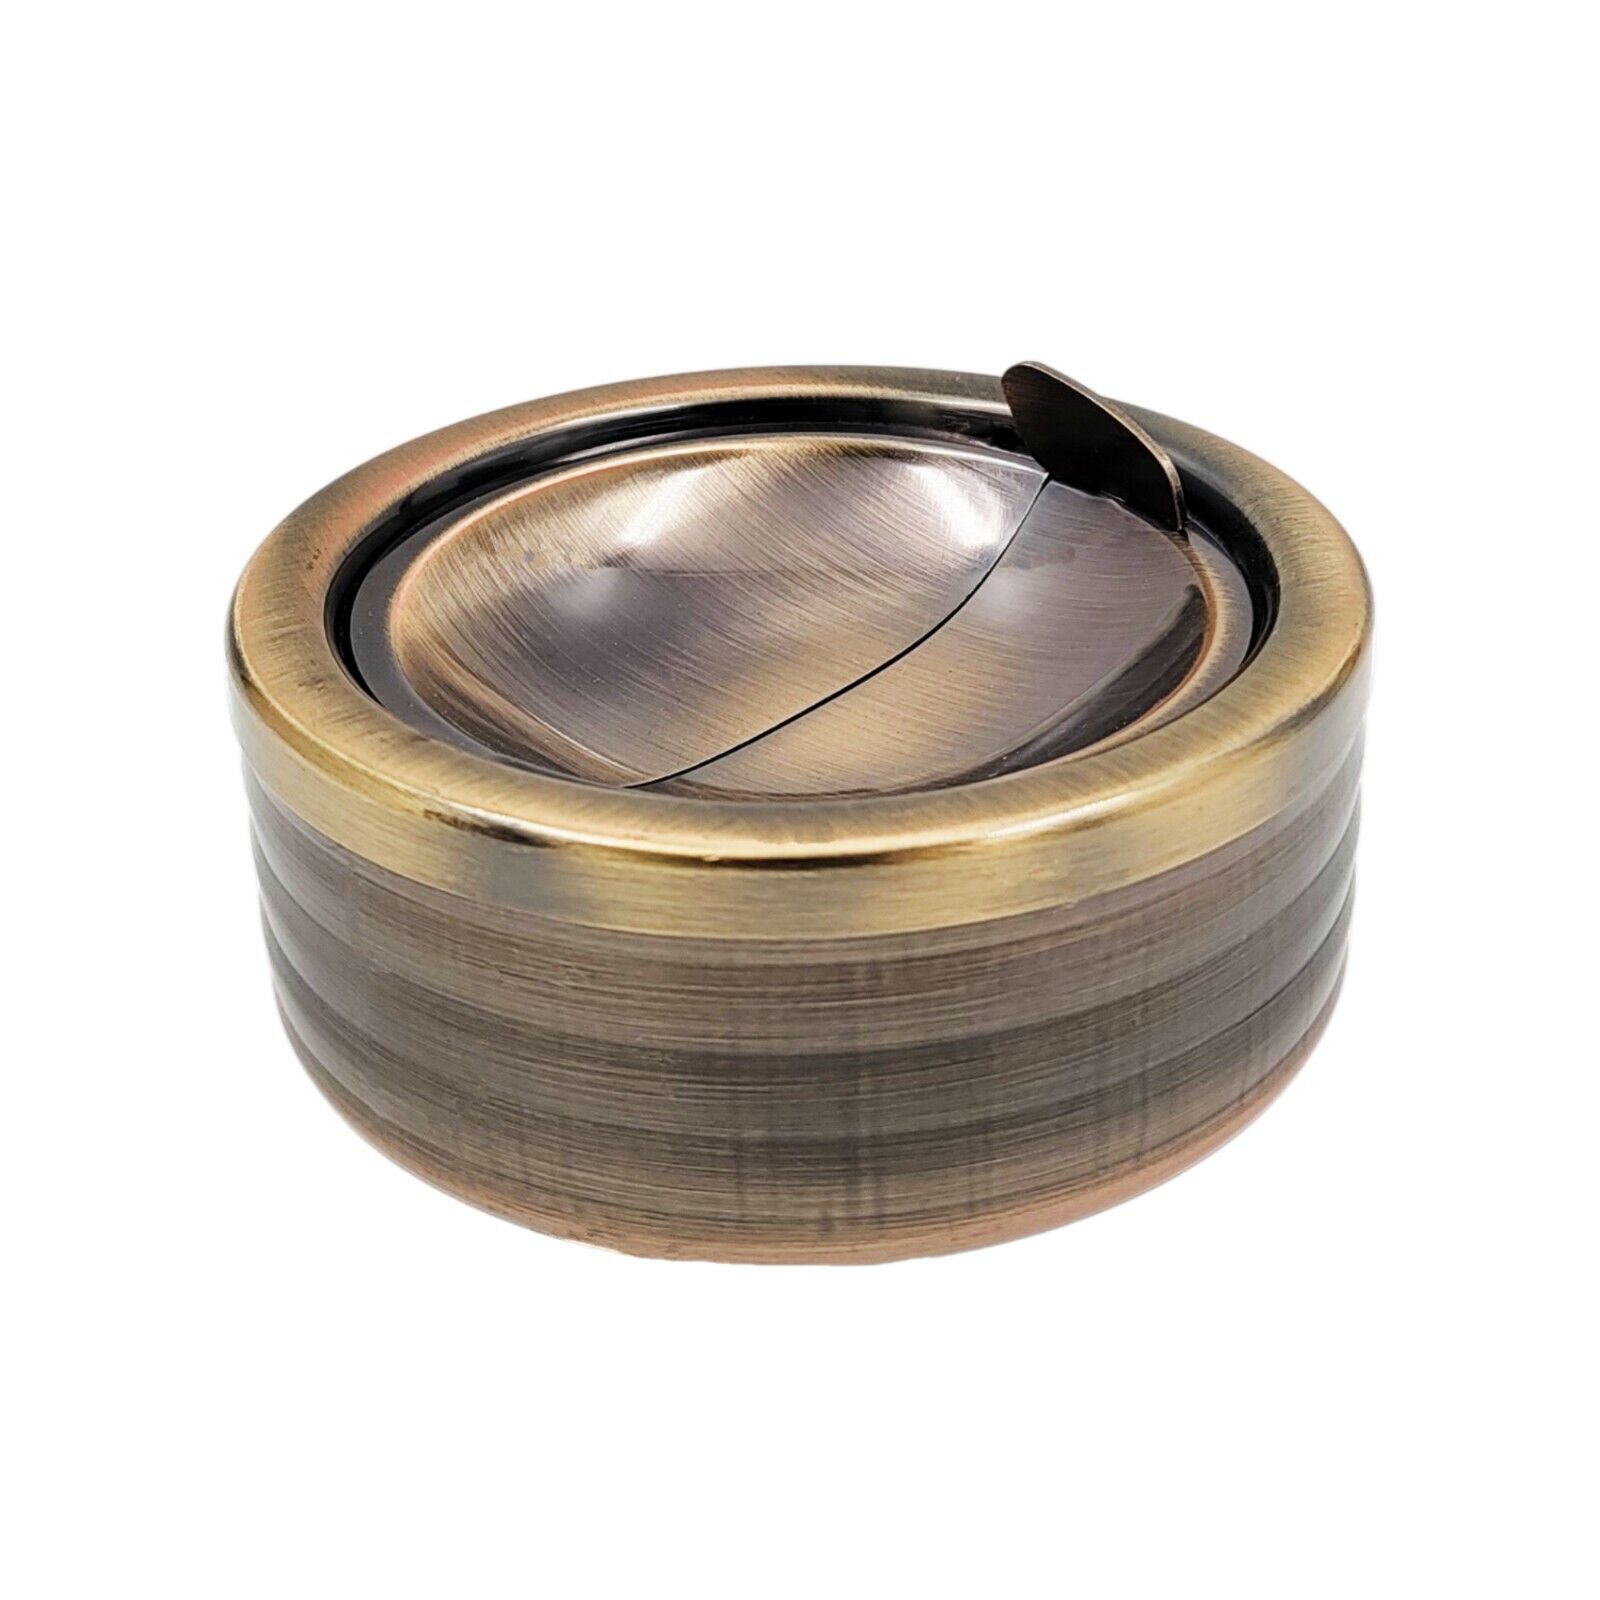 Grooved Bronze Smokeless Ashtray with Lid for Cigarettes Outdoor Outside Patio